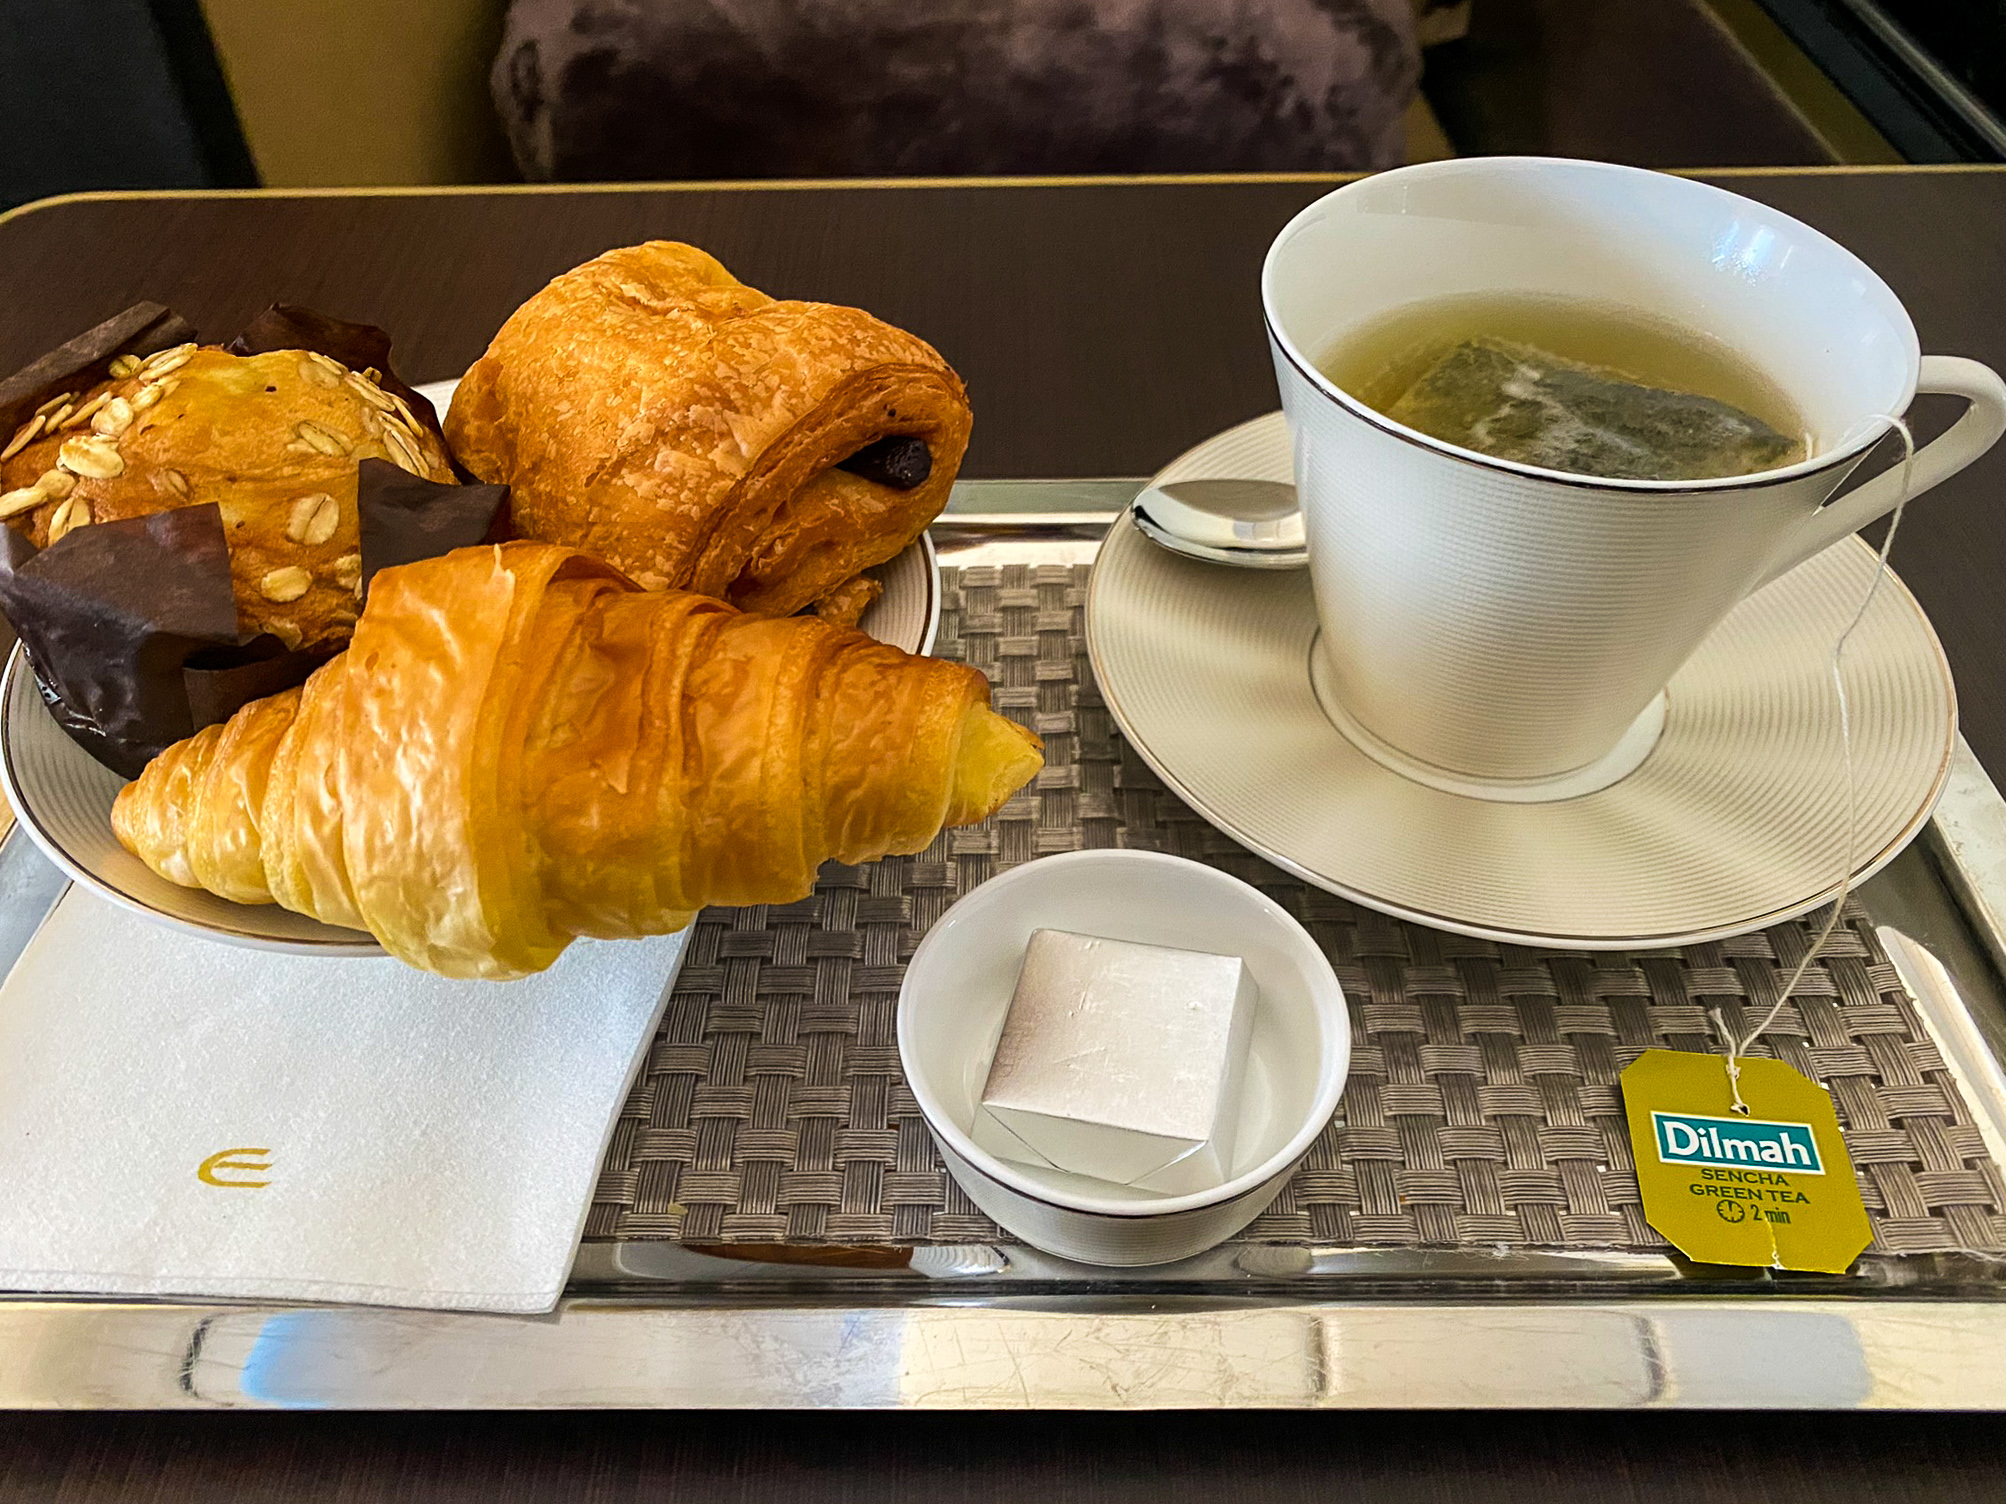 Etihad first class green tea and breakfast pastries